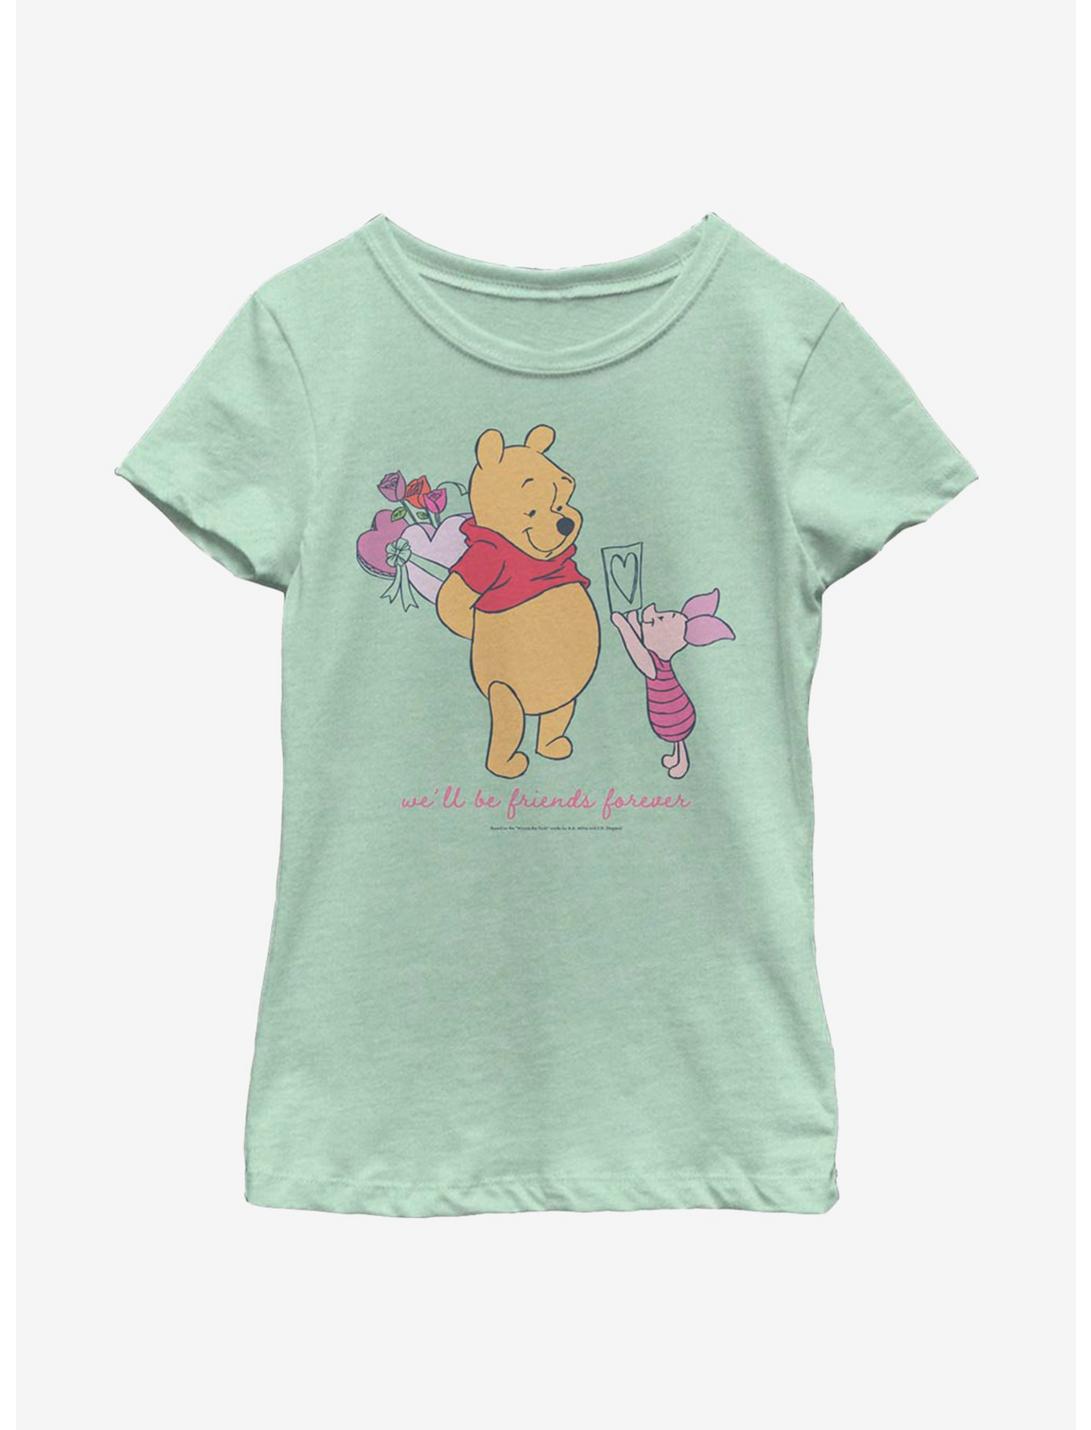 Disney Winnie The Pooh Friends Forever Youth Girls T-Shirt, MINT, hi-res